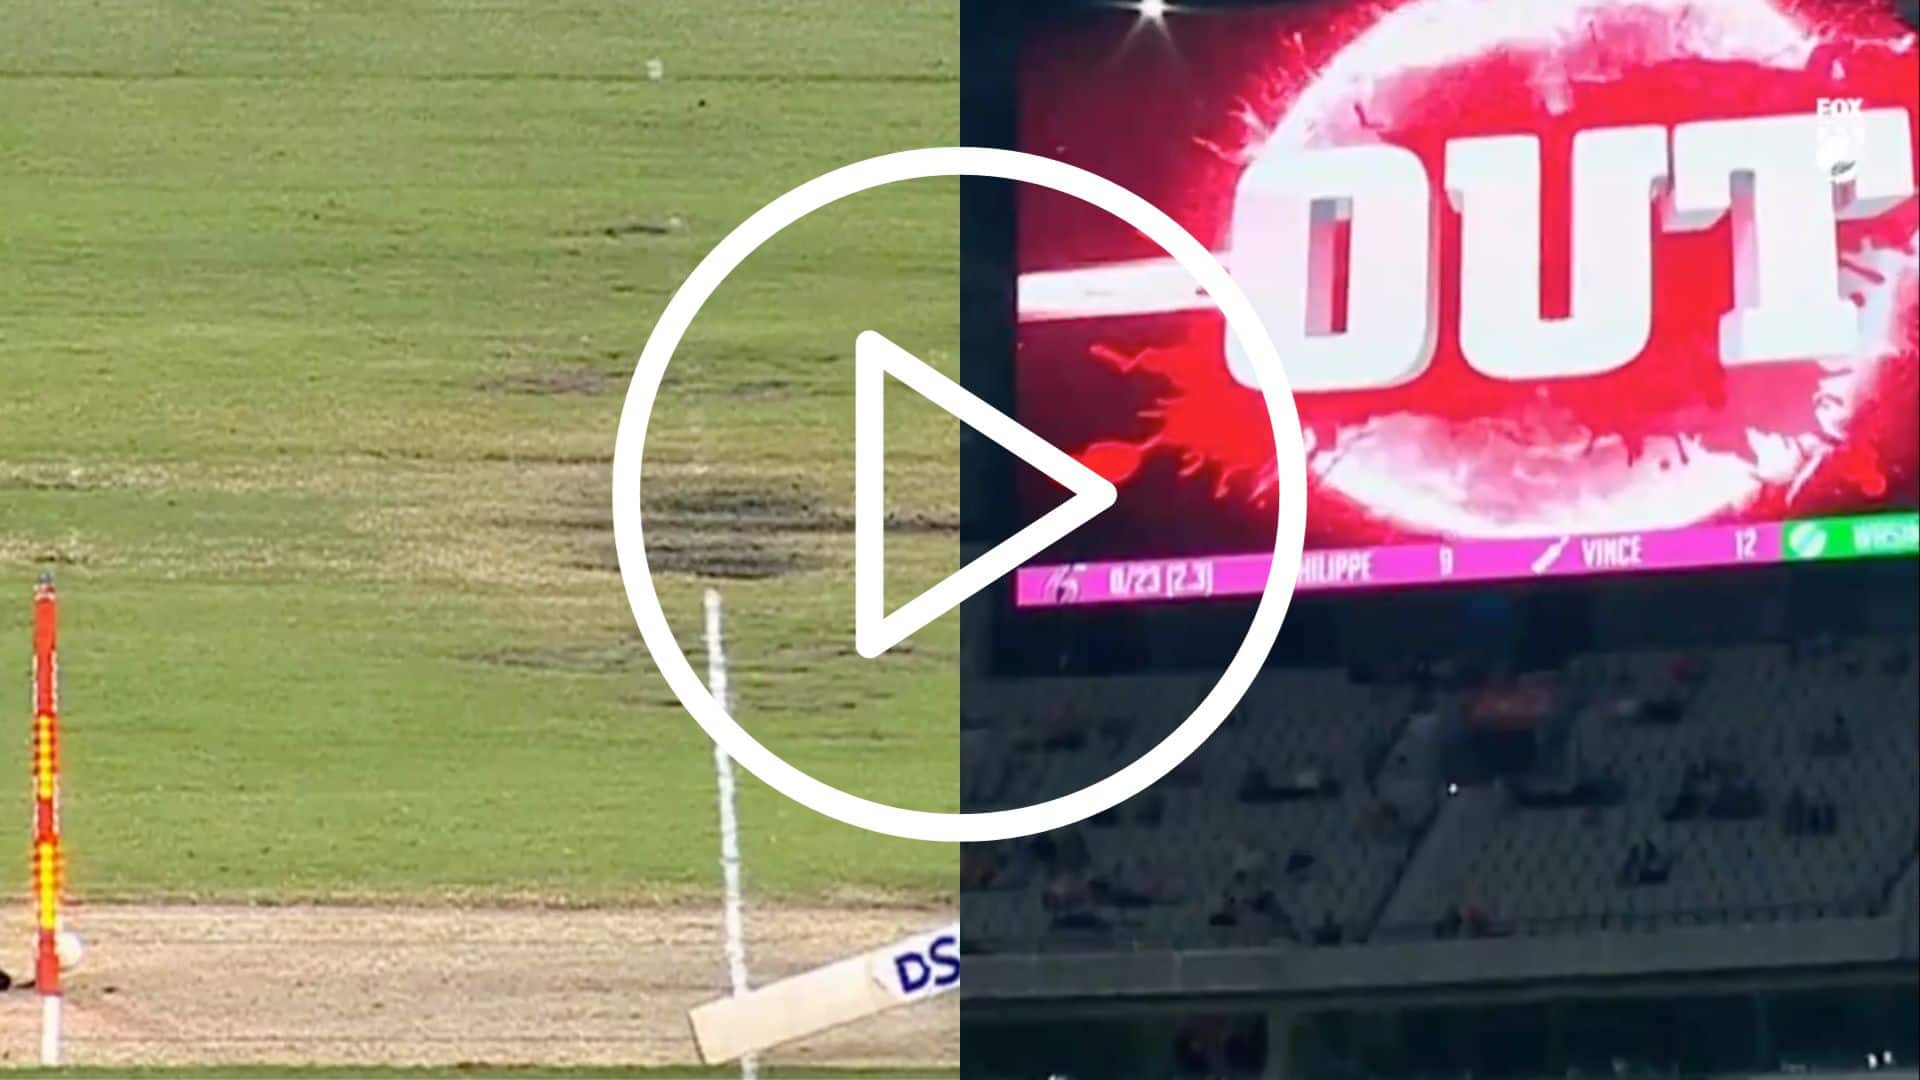 [Watch] Umpire's Wrong Button Push Leaves BBL Officials Embarrassed; Video Goes Viral